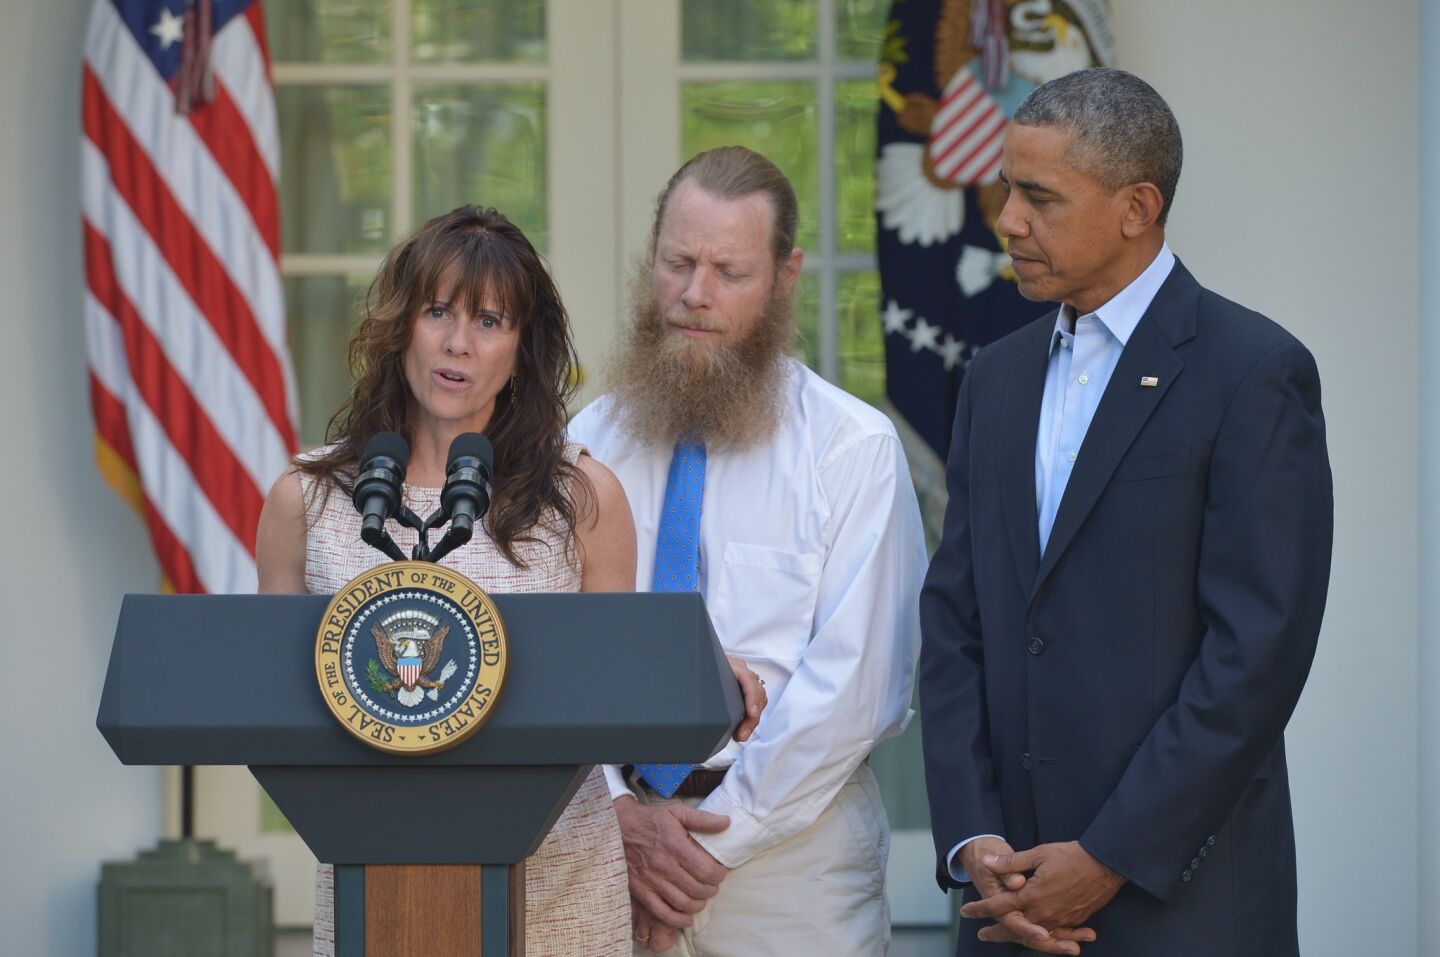 Bowe Bergdahl's mother, Jani Bergdahl, with Bob Bergdahl and President Obama, speaks at the White House on May 31.